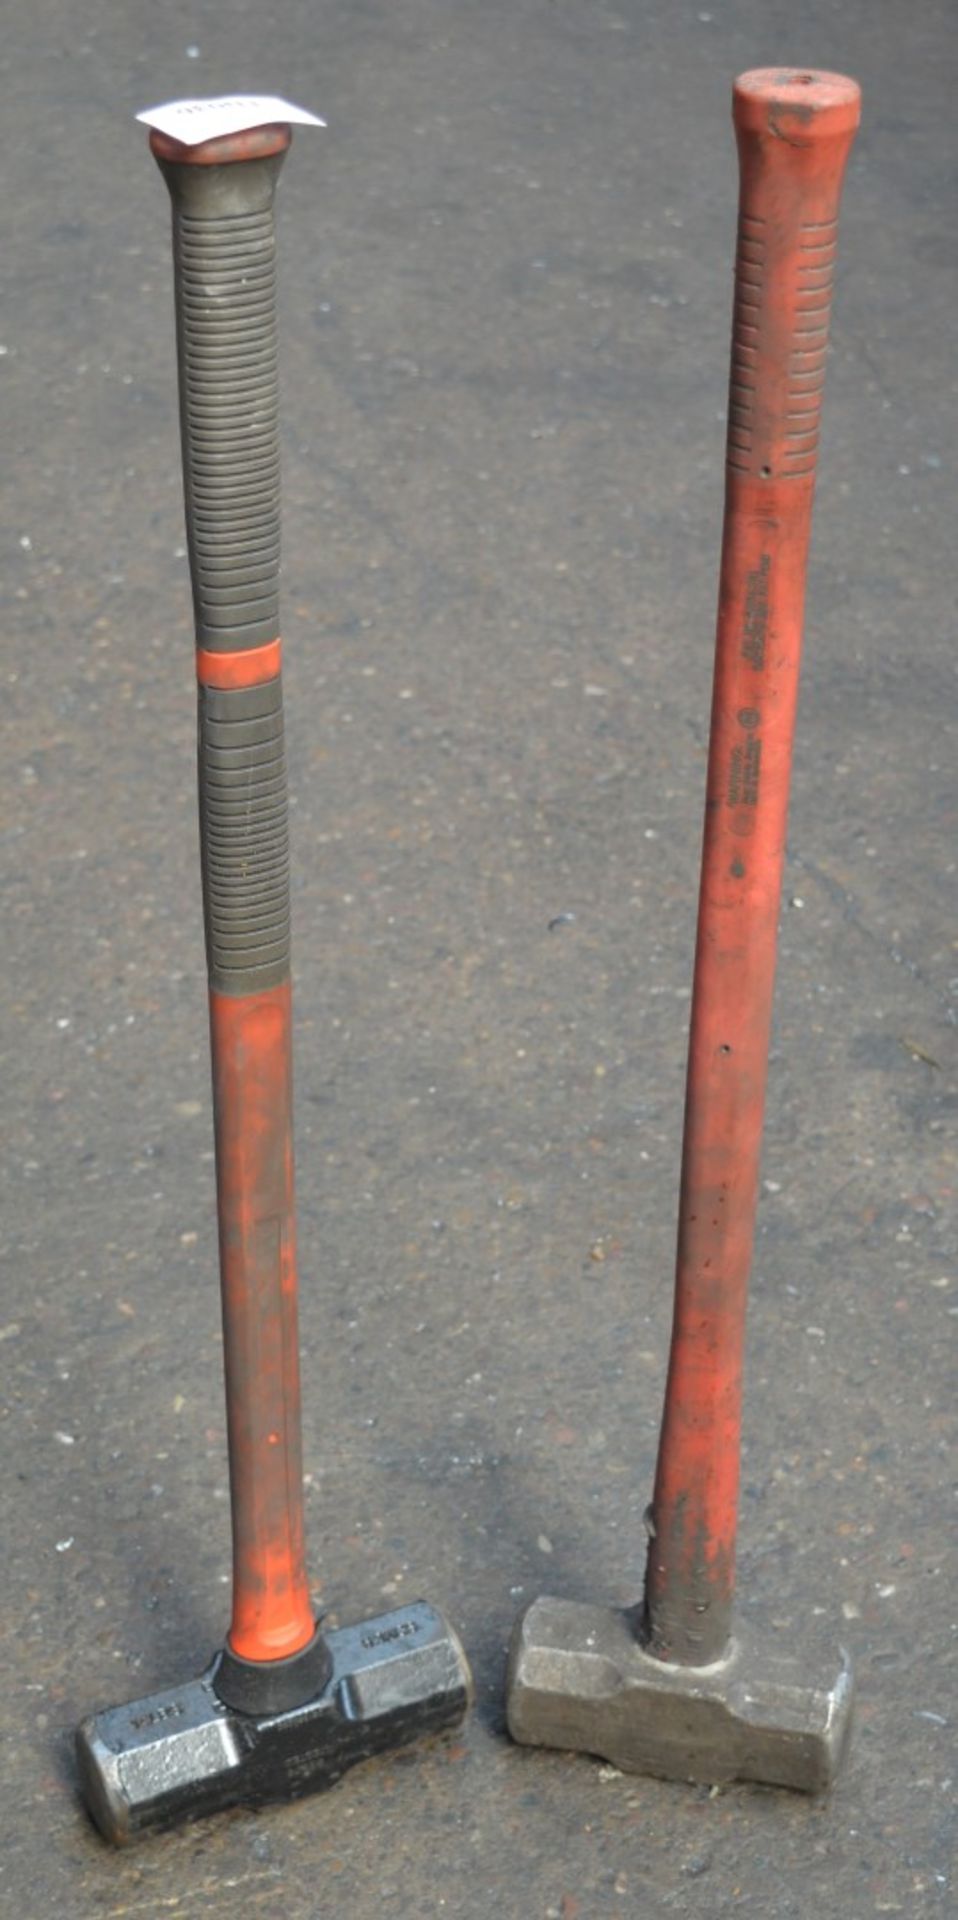 2 x Double Faced 14lb Sledge Hammers - CL202 - Ref EN036 - Location: Worcester WR14